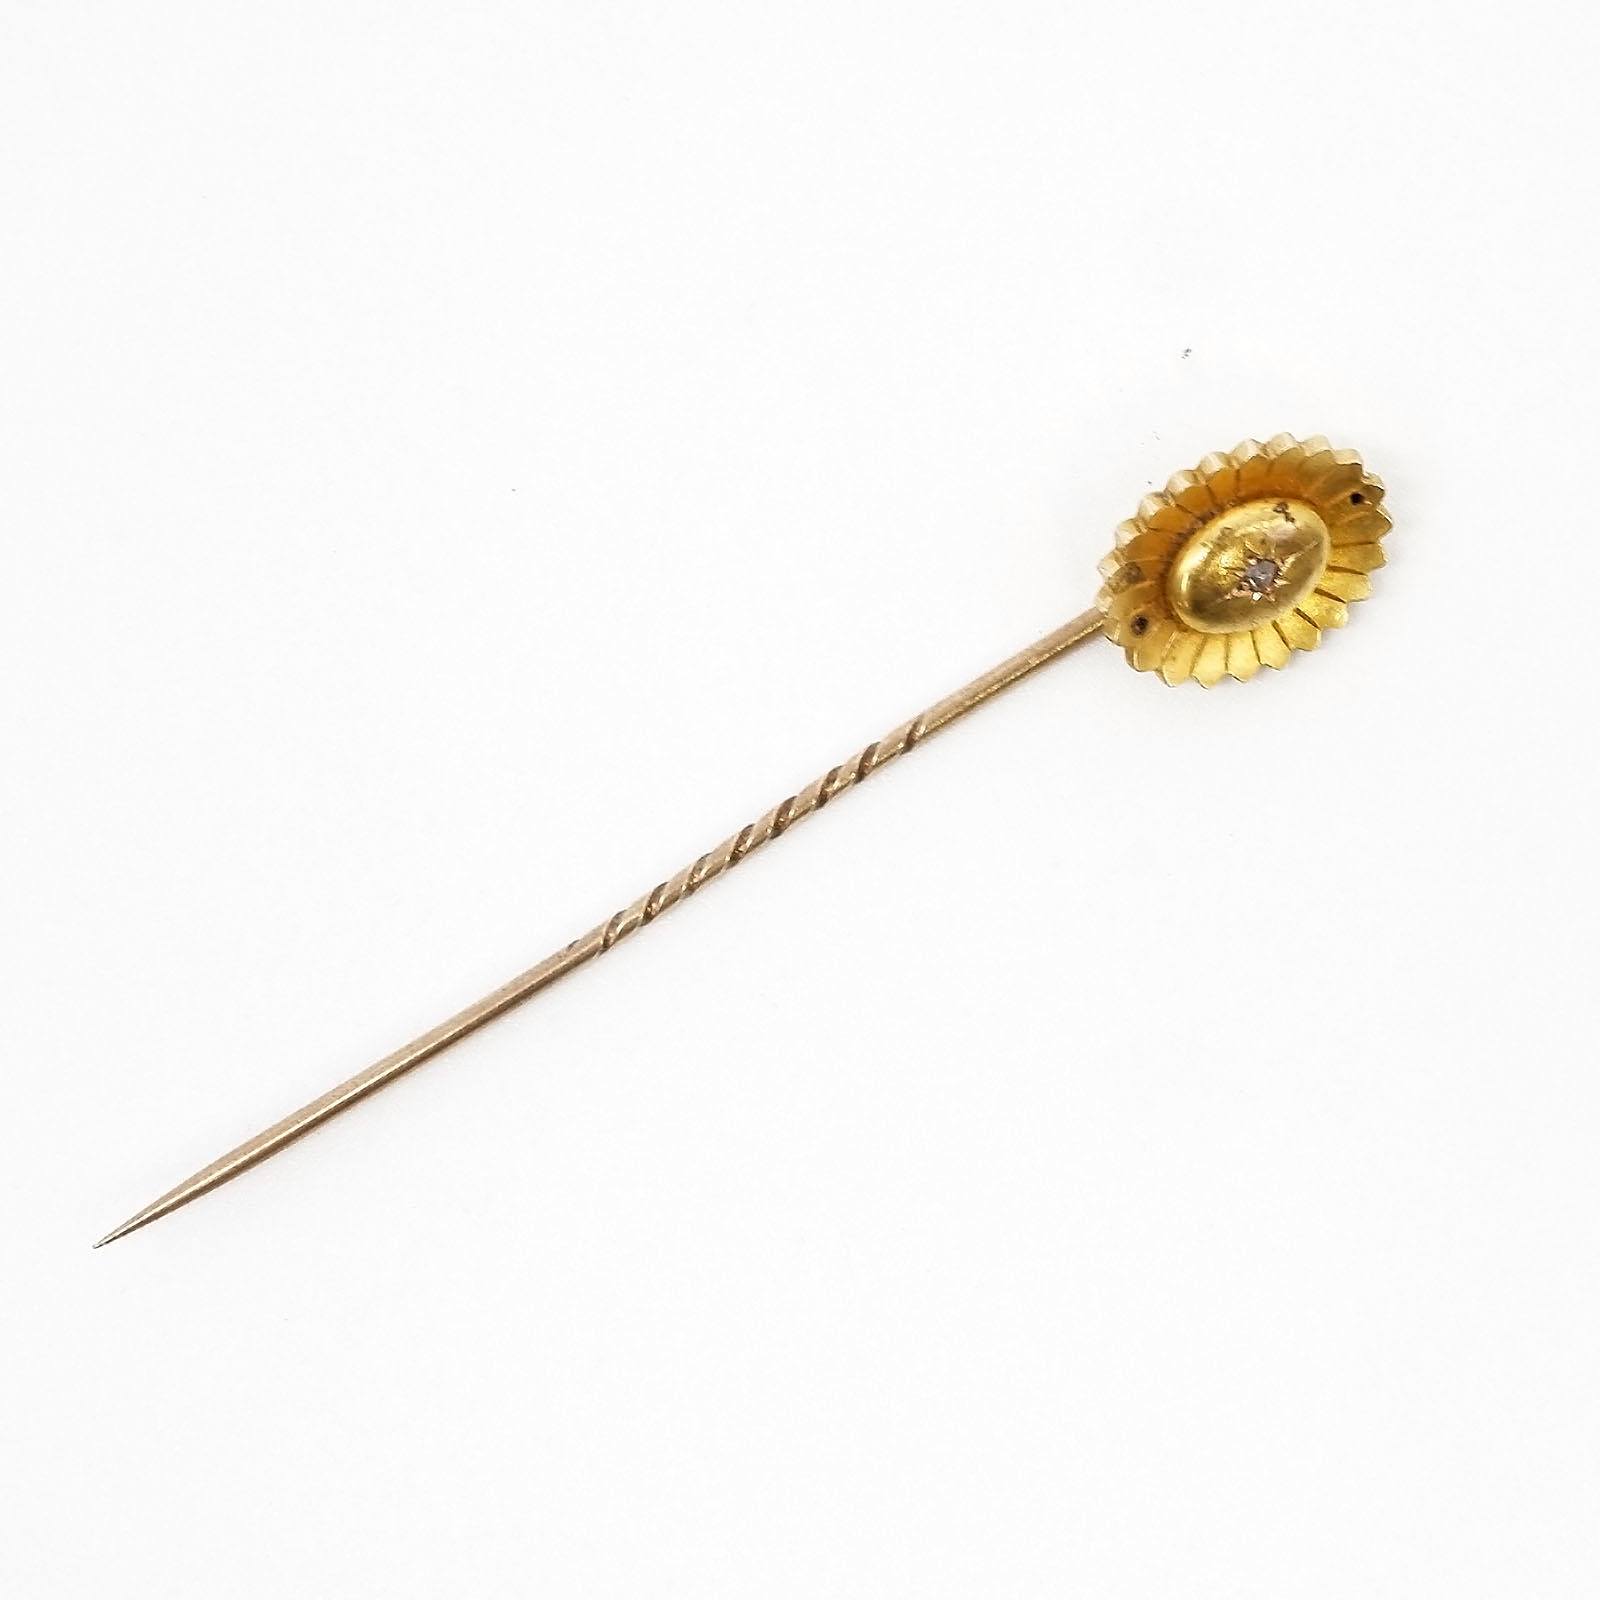 'Antique 9ct Yellow Gold Lapel Pin with 15ct Yellow Gold Flower Shaped Head and One Rose Cut Diamond, 2g'